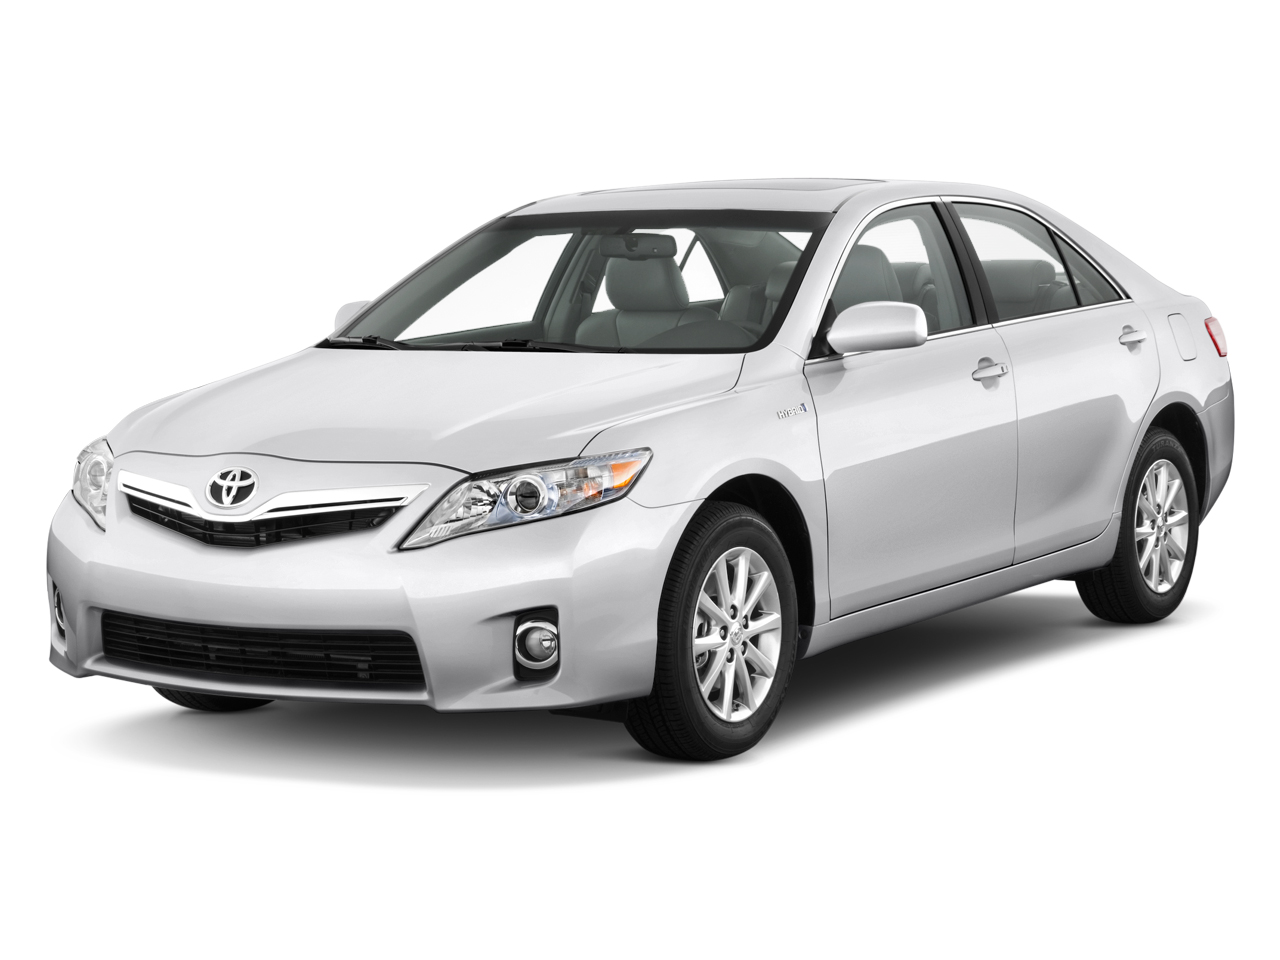 2011 Toyota Camry Hybrid Review, Ratings, Specs, Prices, and Photos - The Car Connection